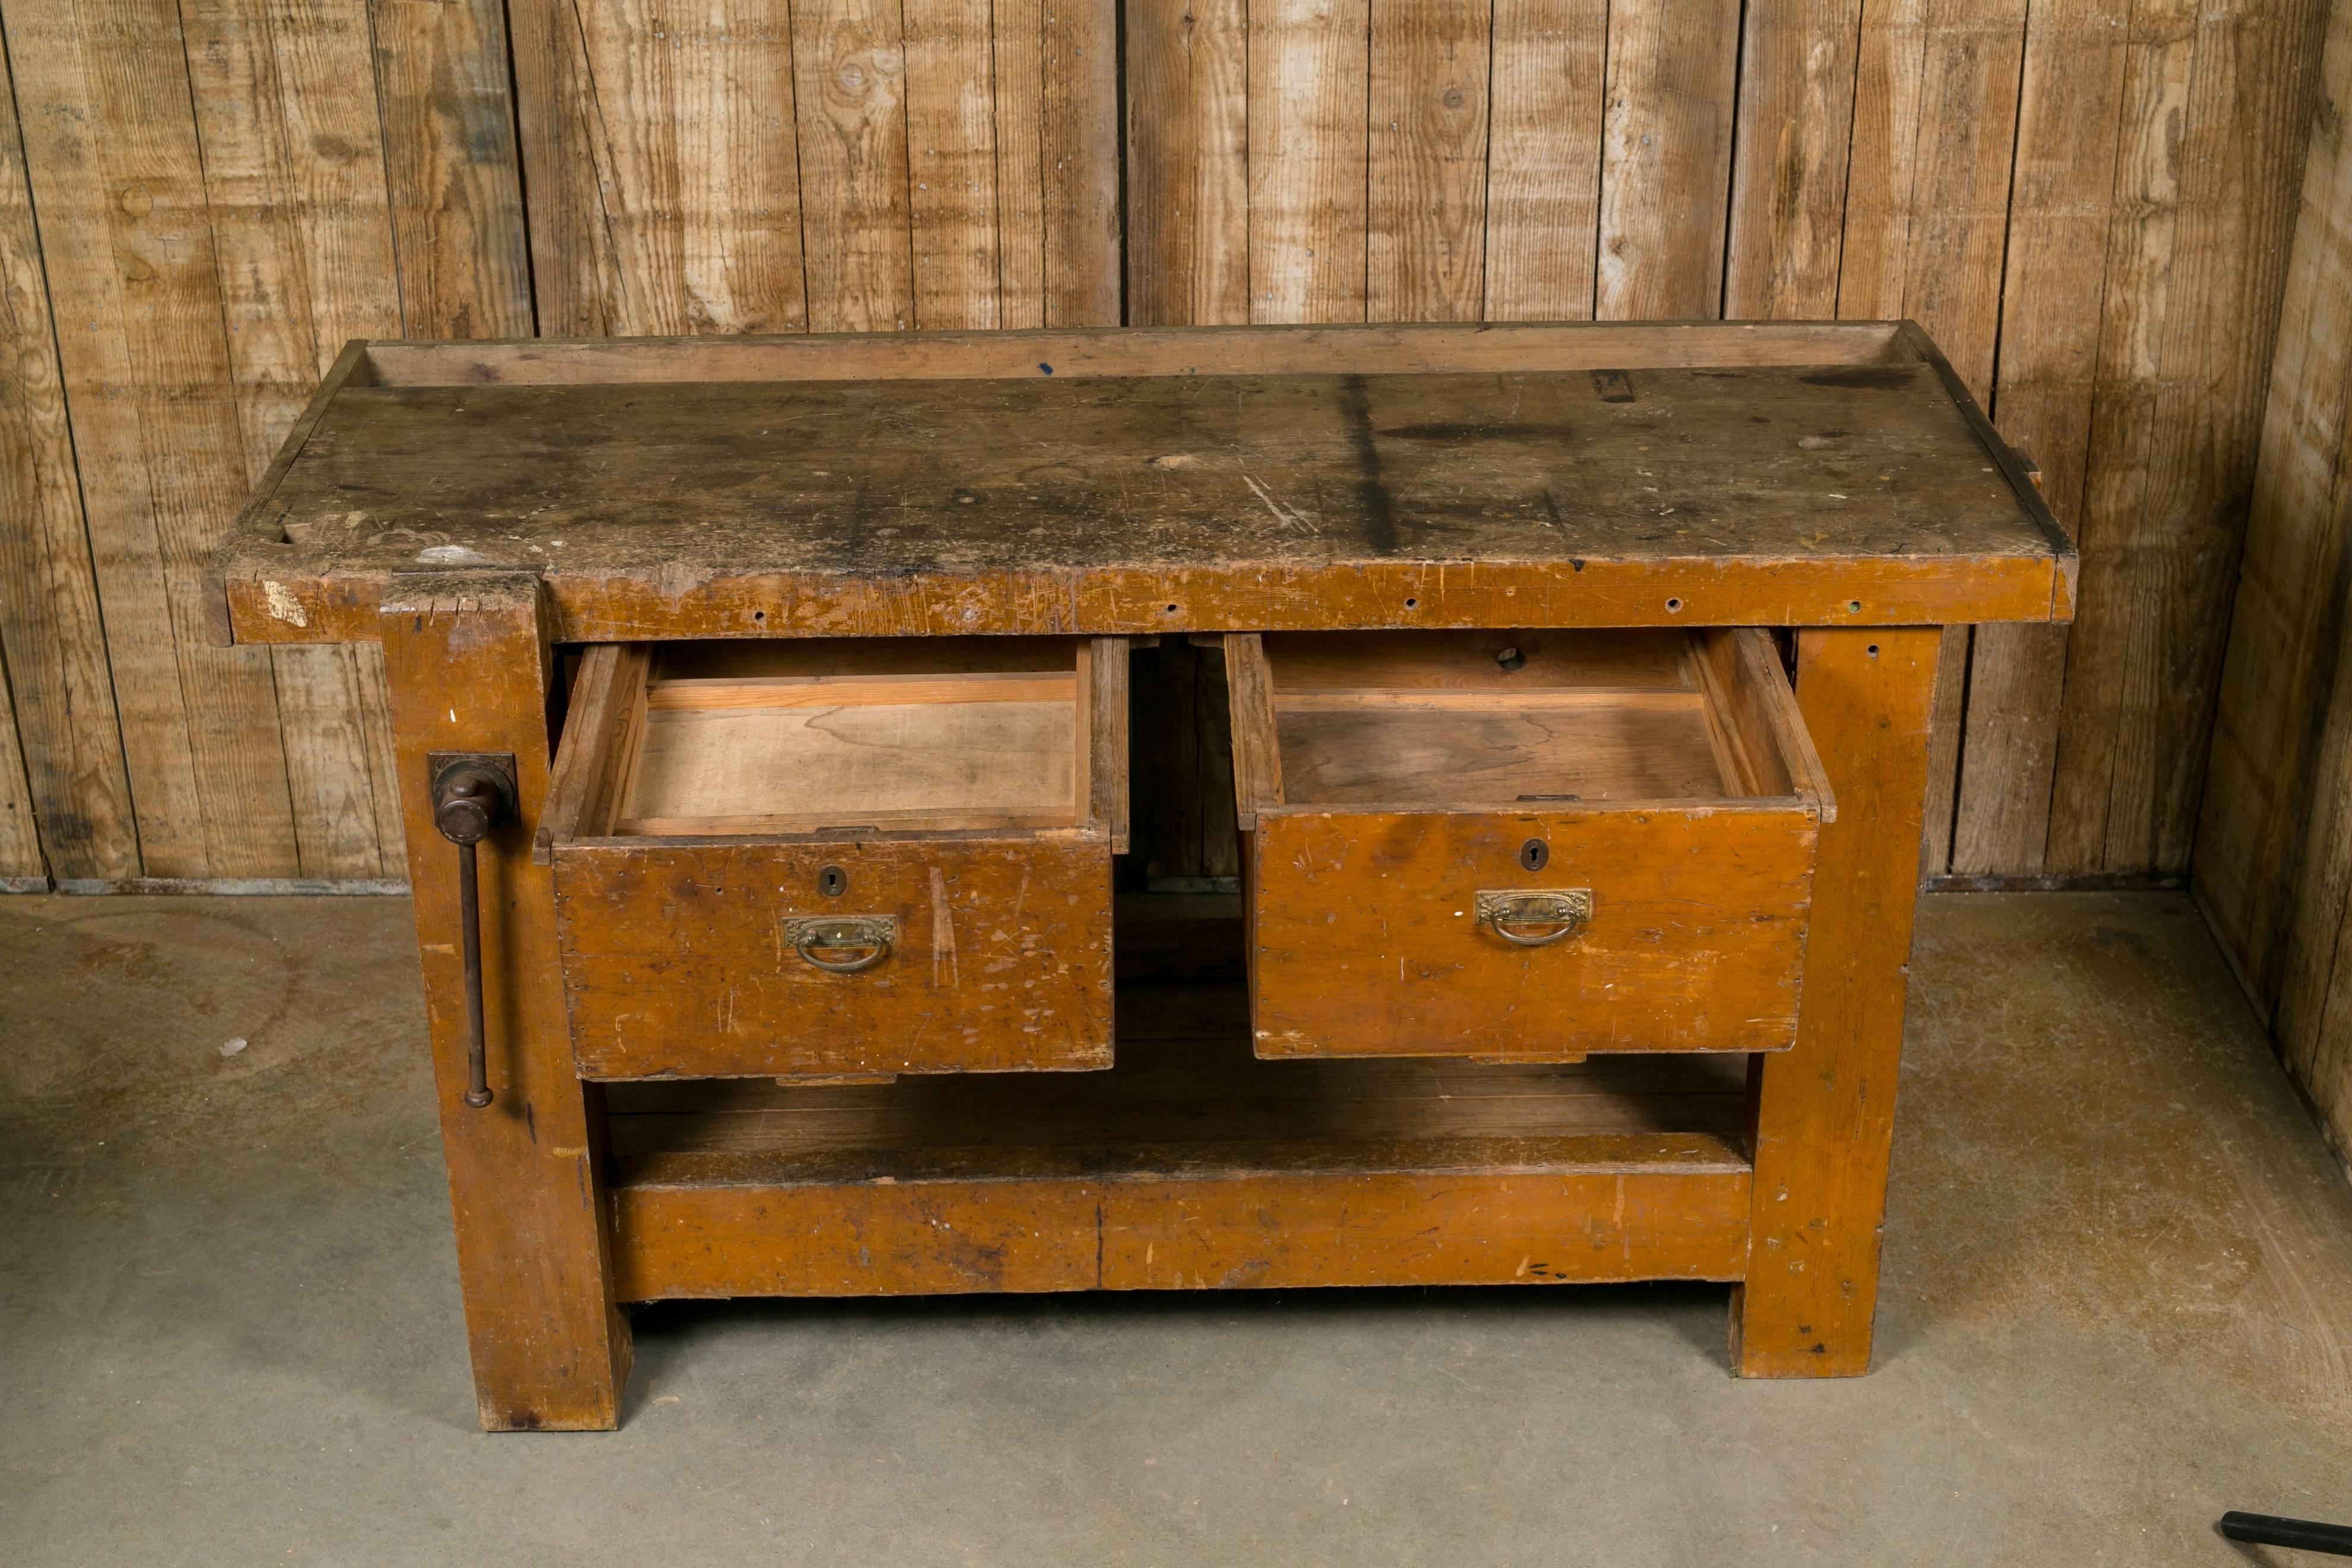 Belgian work bench with vise clamp on the front and two drawers. All original with a shelf below. Great for a kitchen island or console. Beautiful worn, honey colored wood with rustic look.